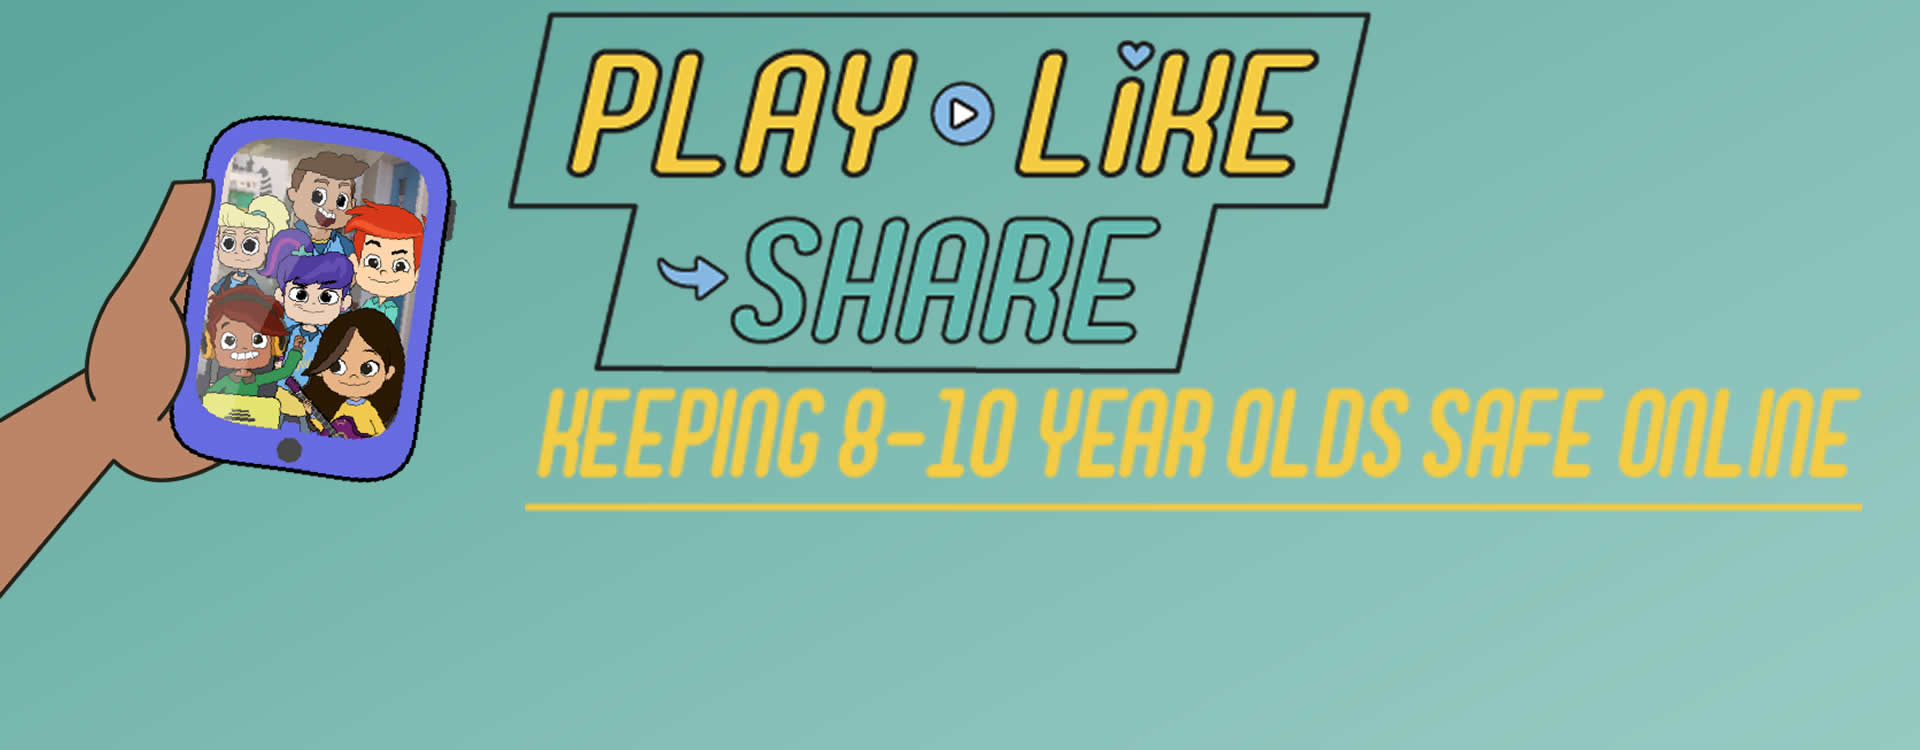 Play Like Share: online safety for 8-10 year olds